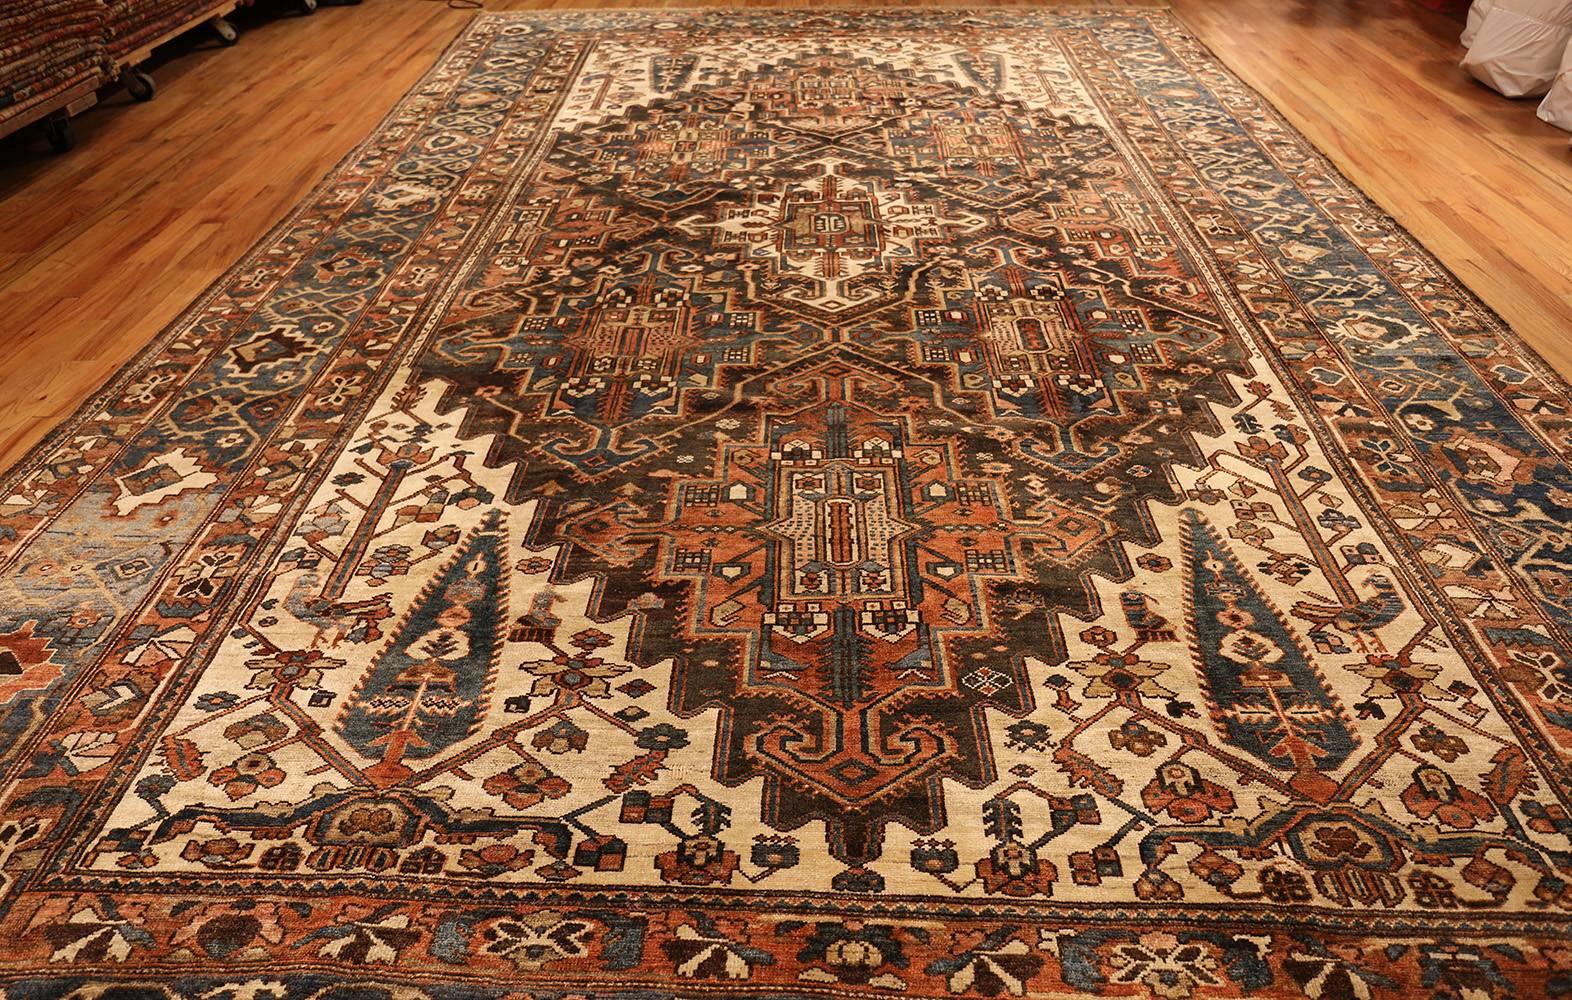 Large Antique Tribal Geometric Persian Bakhtiari Rug, Origin: Persia, Circa: 1920's. Size: 11 ft 4 in x 18 ft 8 in (3.45 m x 5.69 m)

Fiery influences abound in this visually stunning antique carpet from Persia and images of warm coals and embers